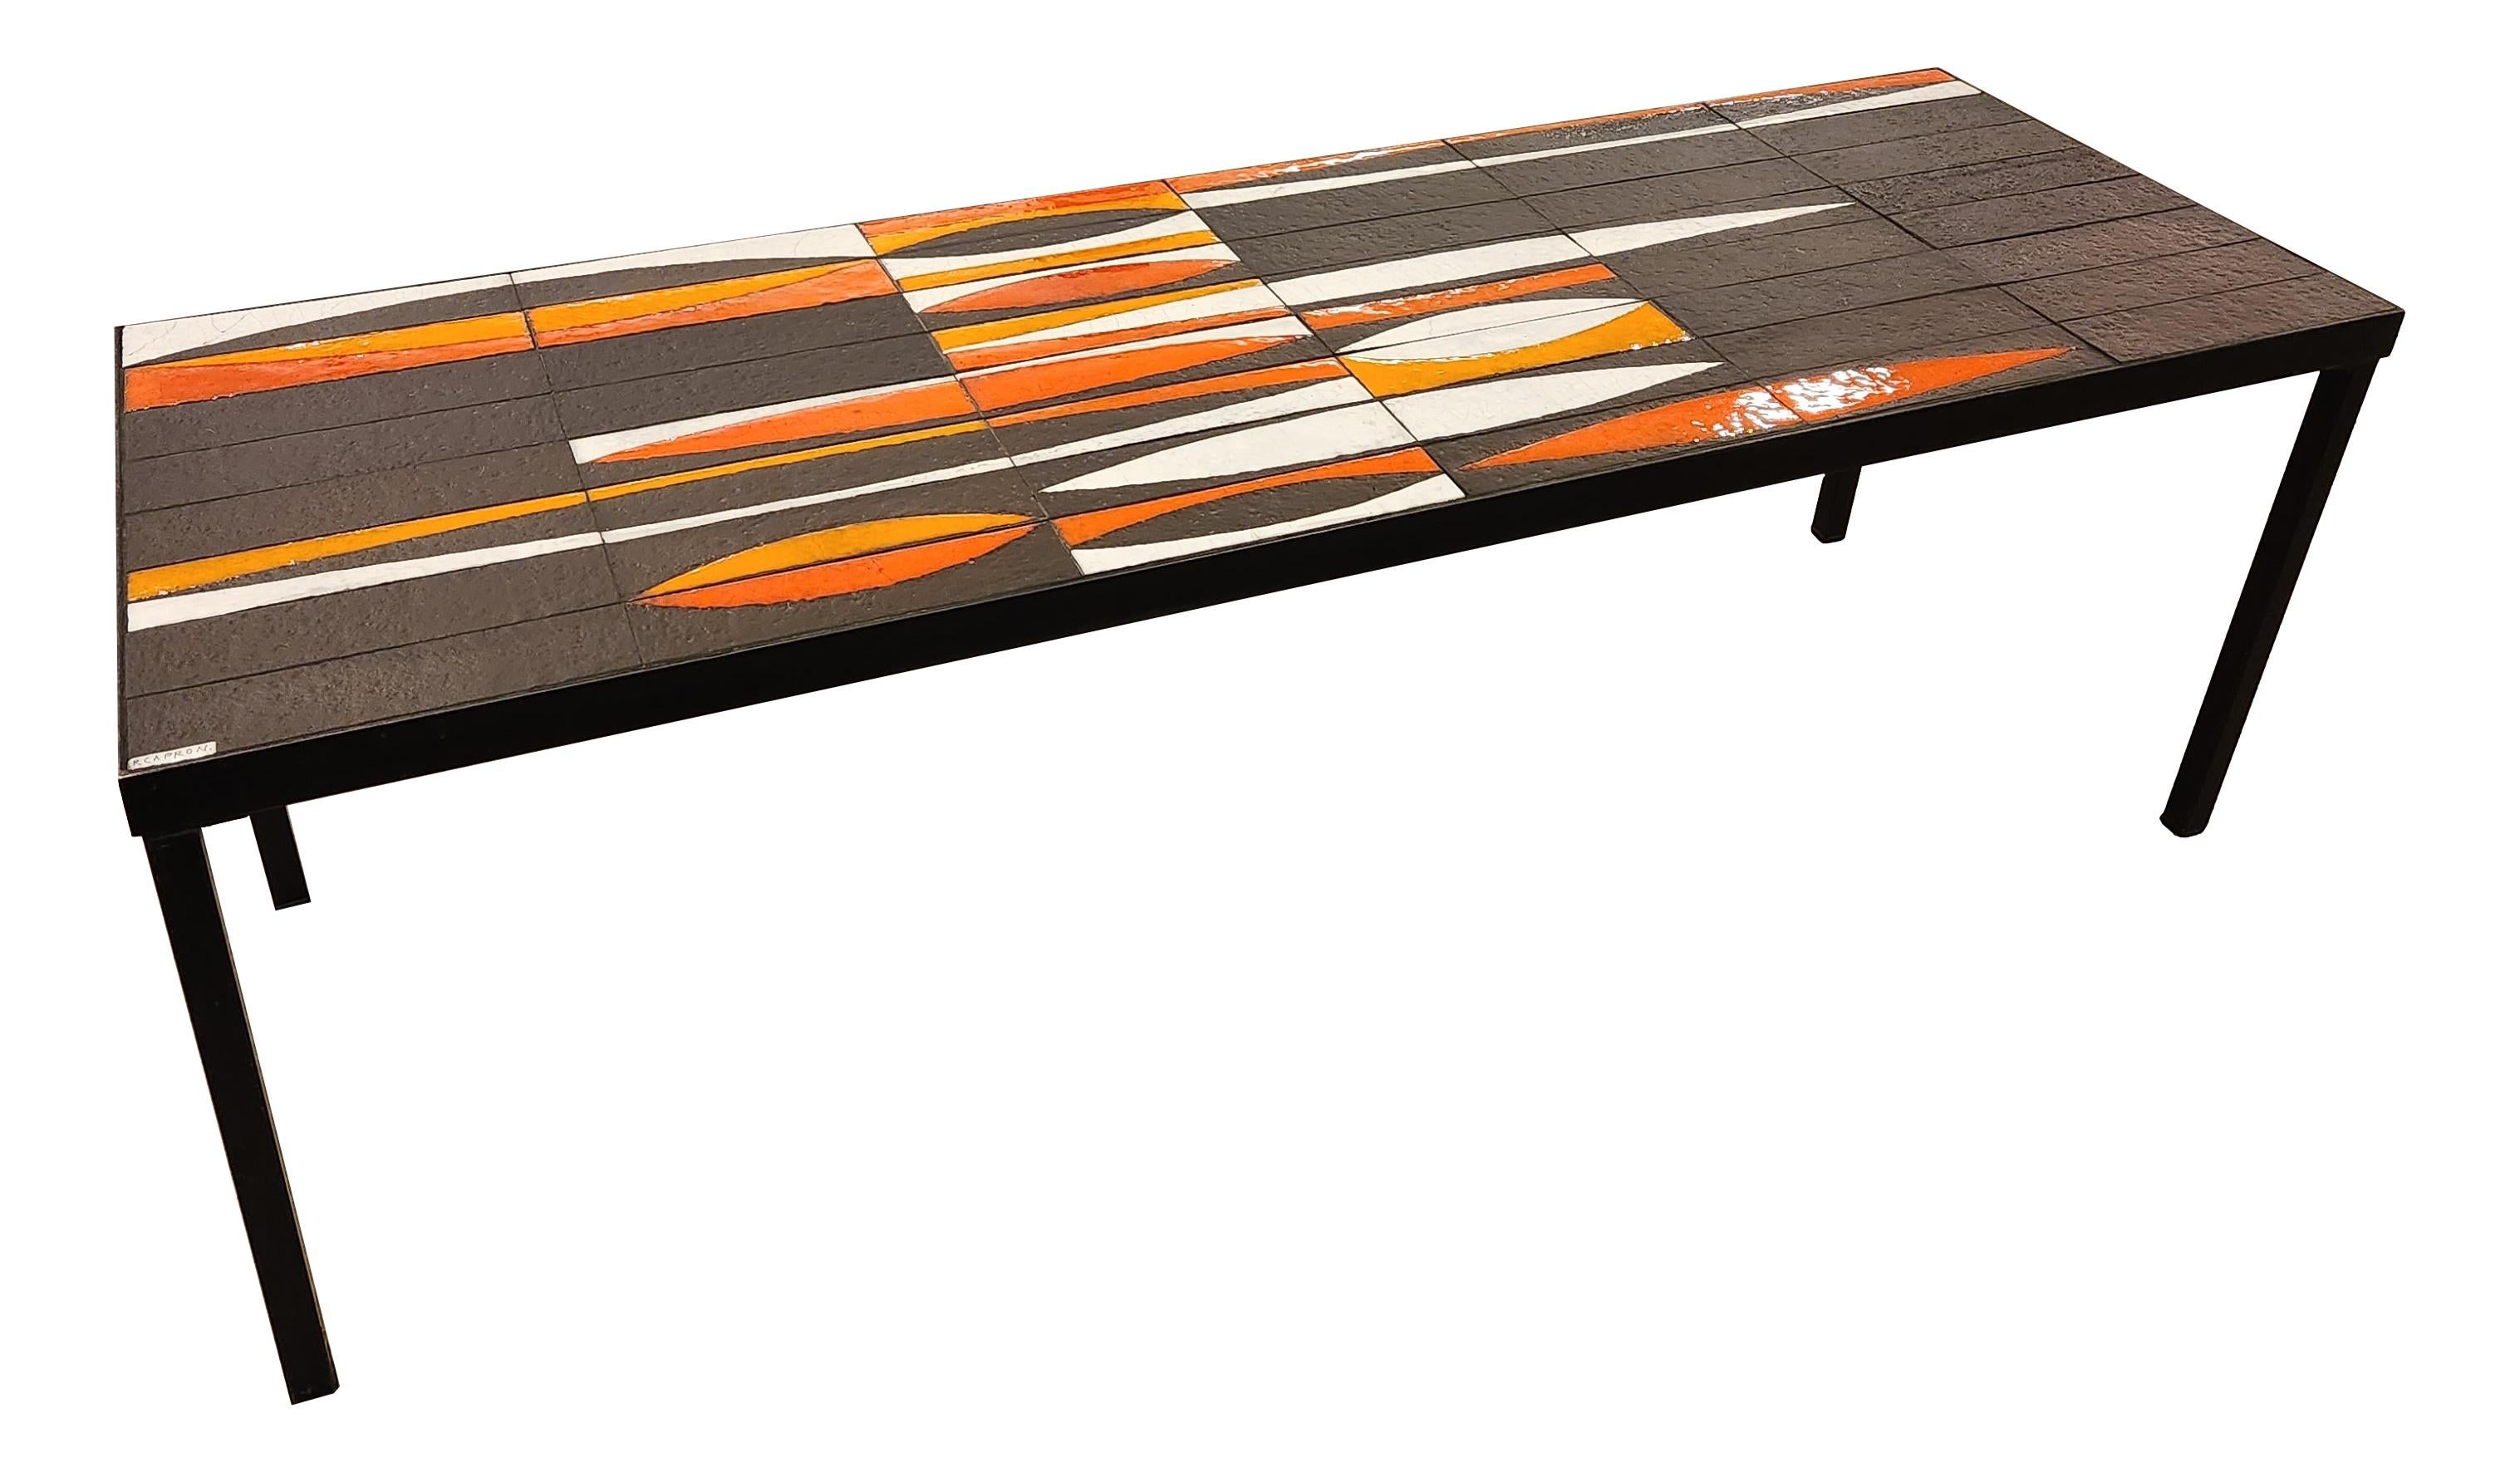 Roger Capron - Vintage Ceramic Coffee Table with Navette Tiles, 1950's